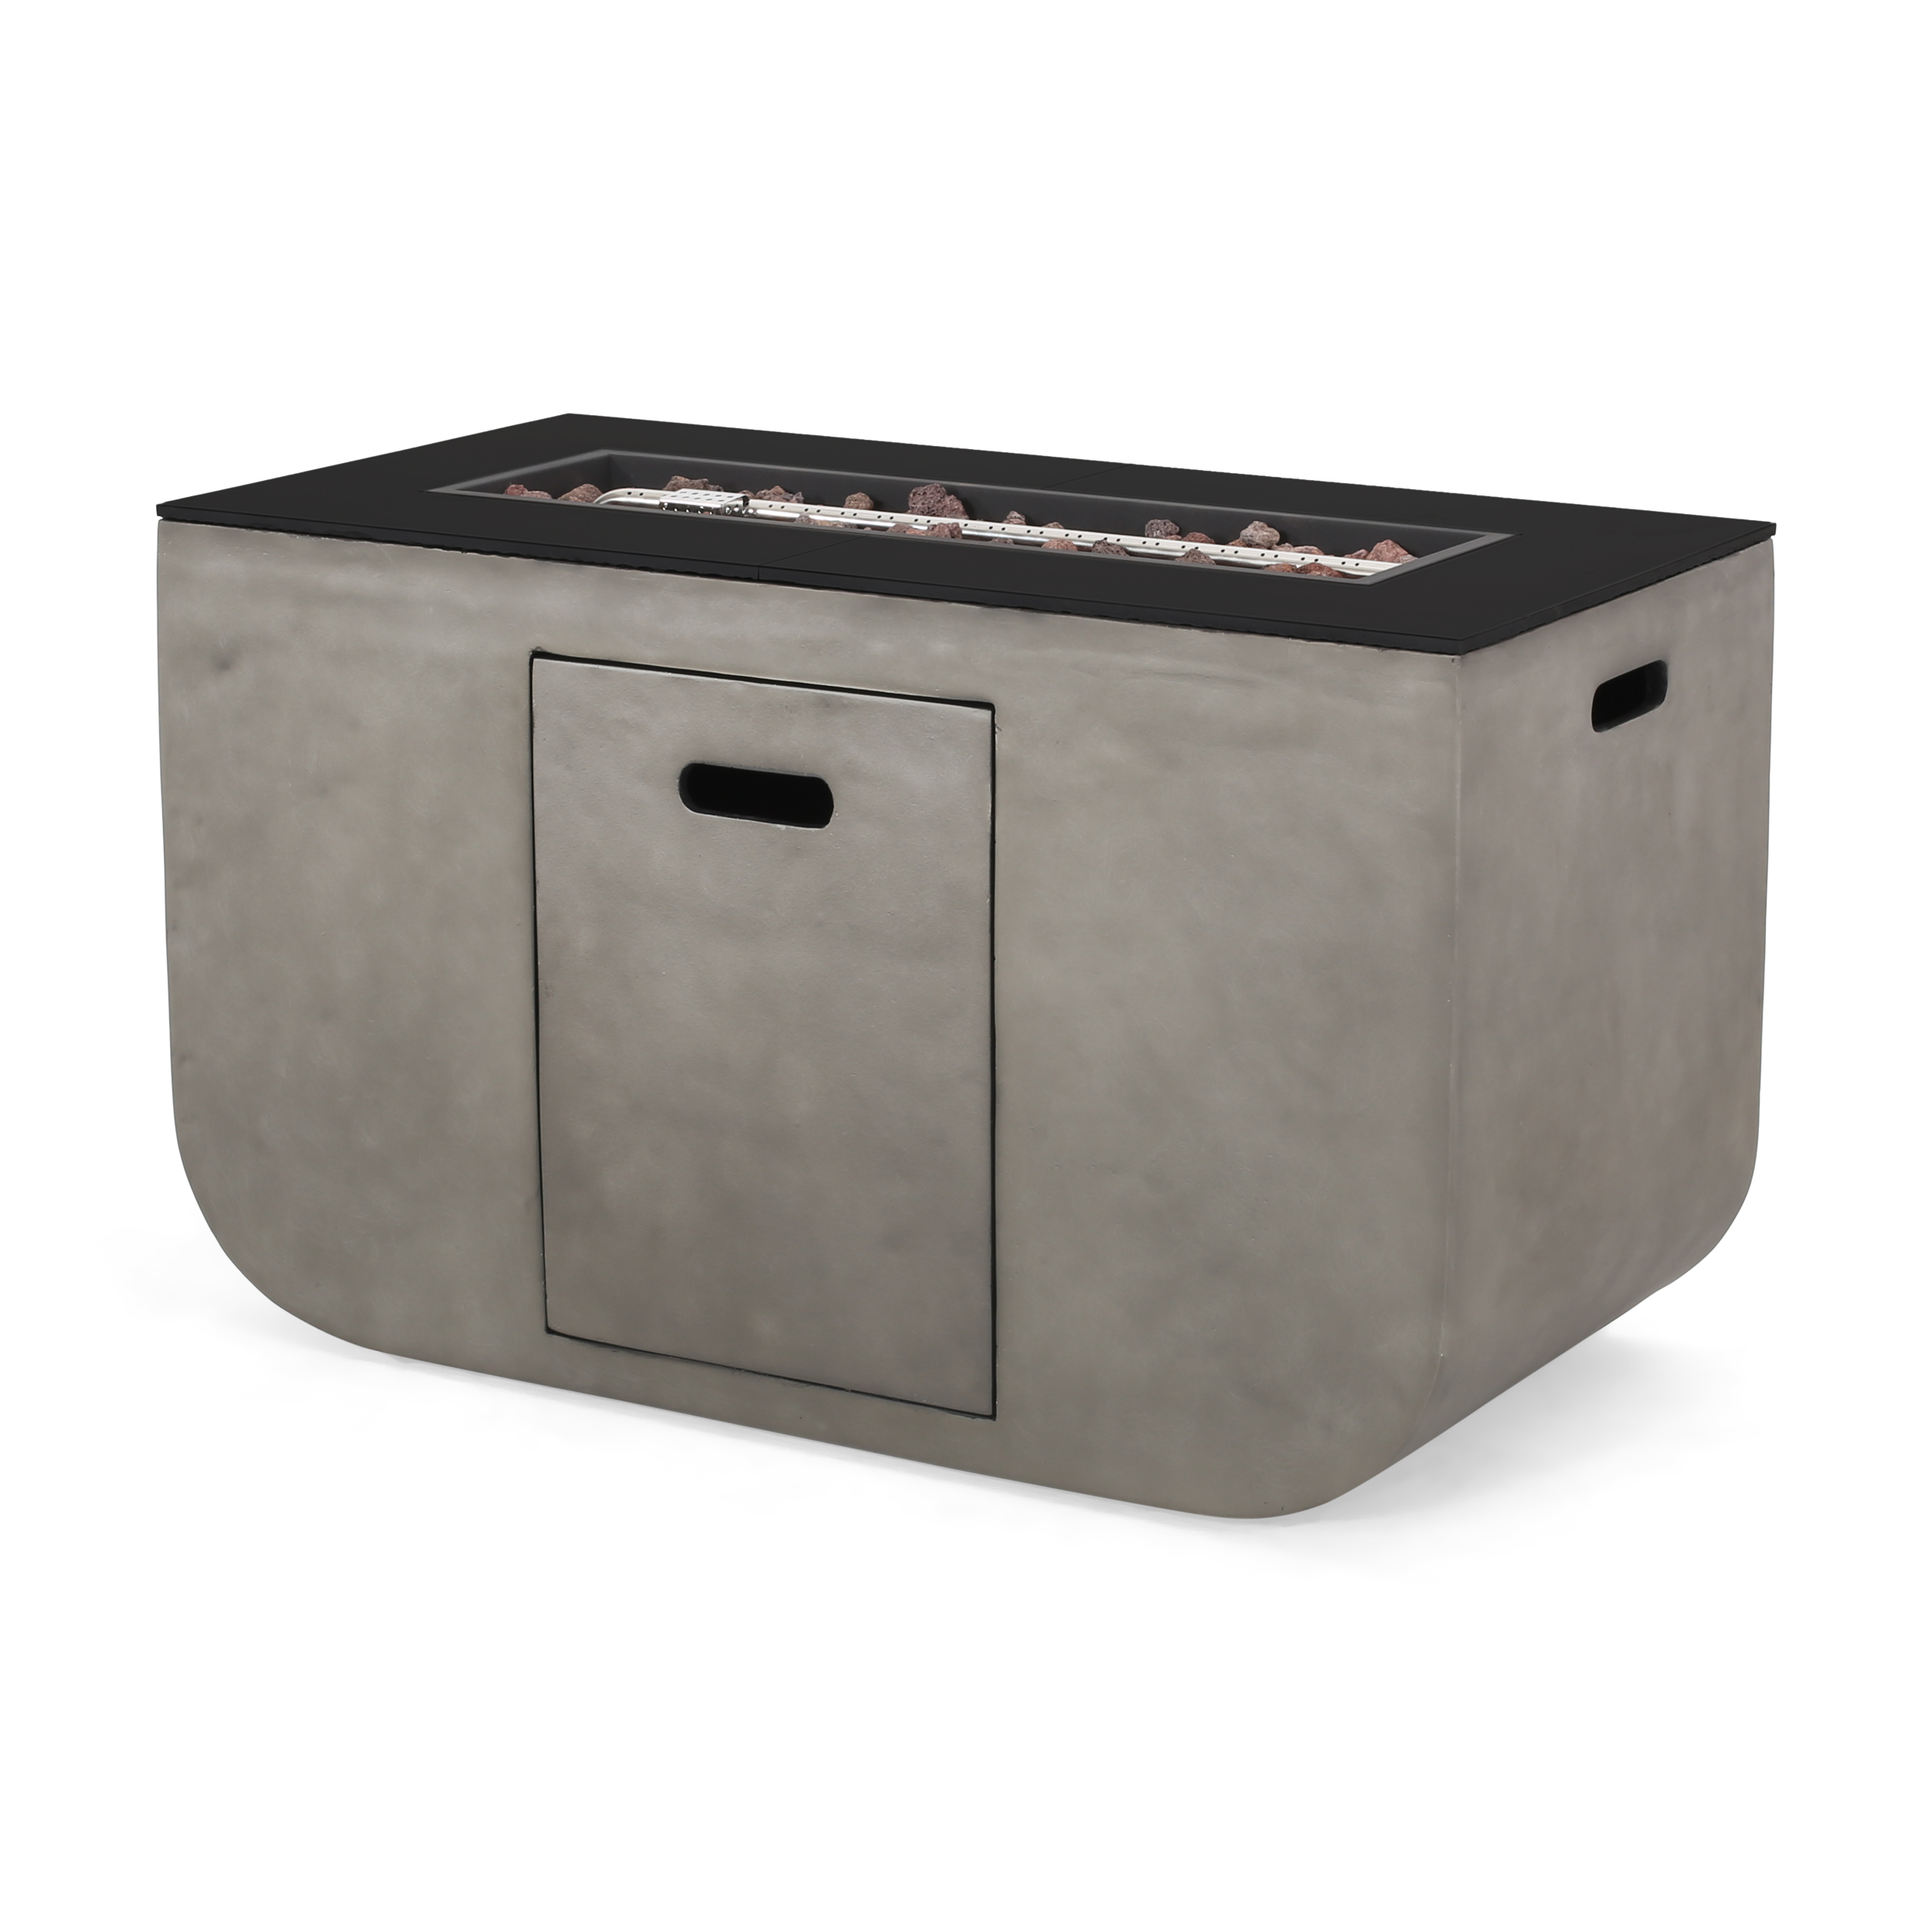 Noble House Adio 40" Rectangular Fire Pit in Light Gray and Black - image 2 of 8